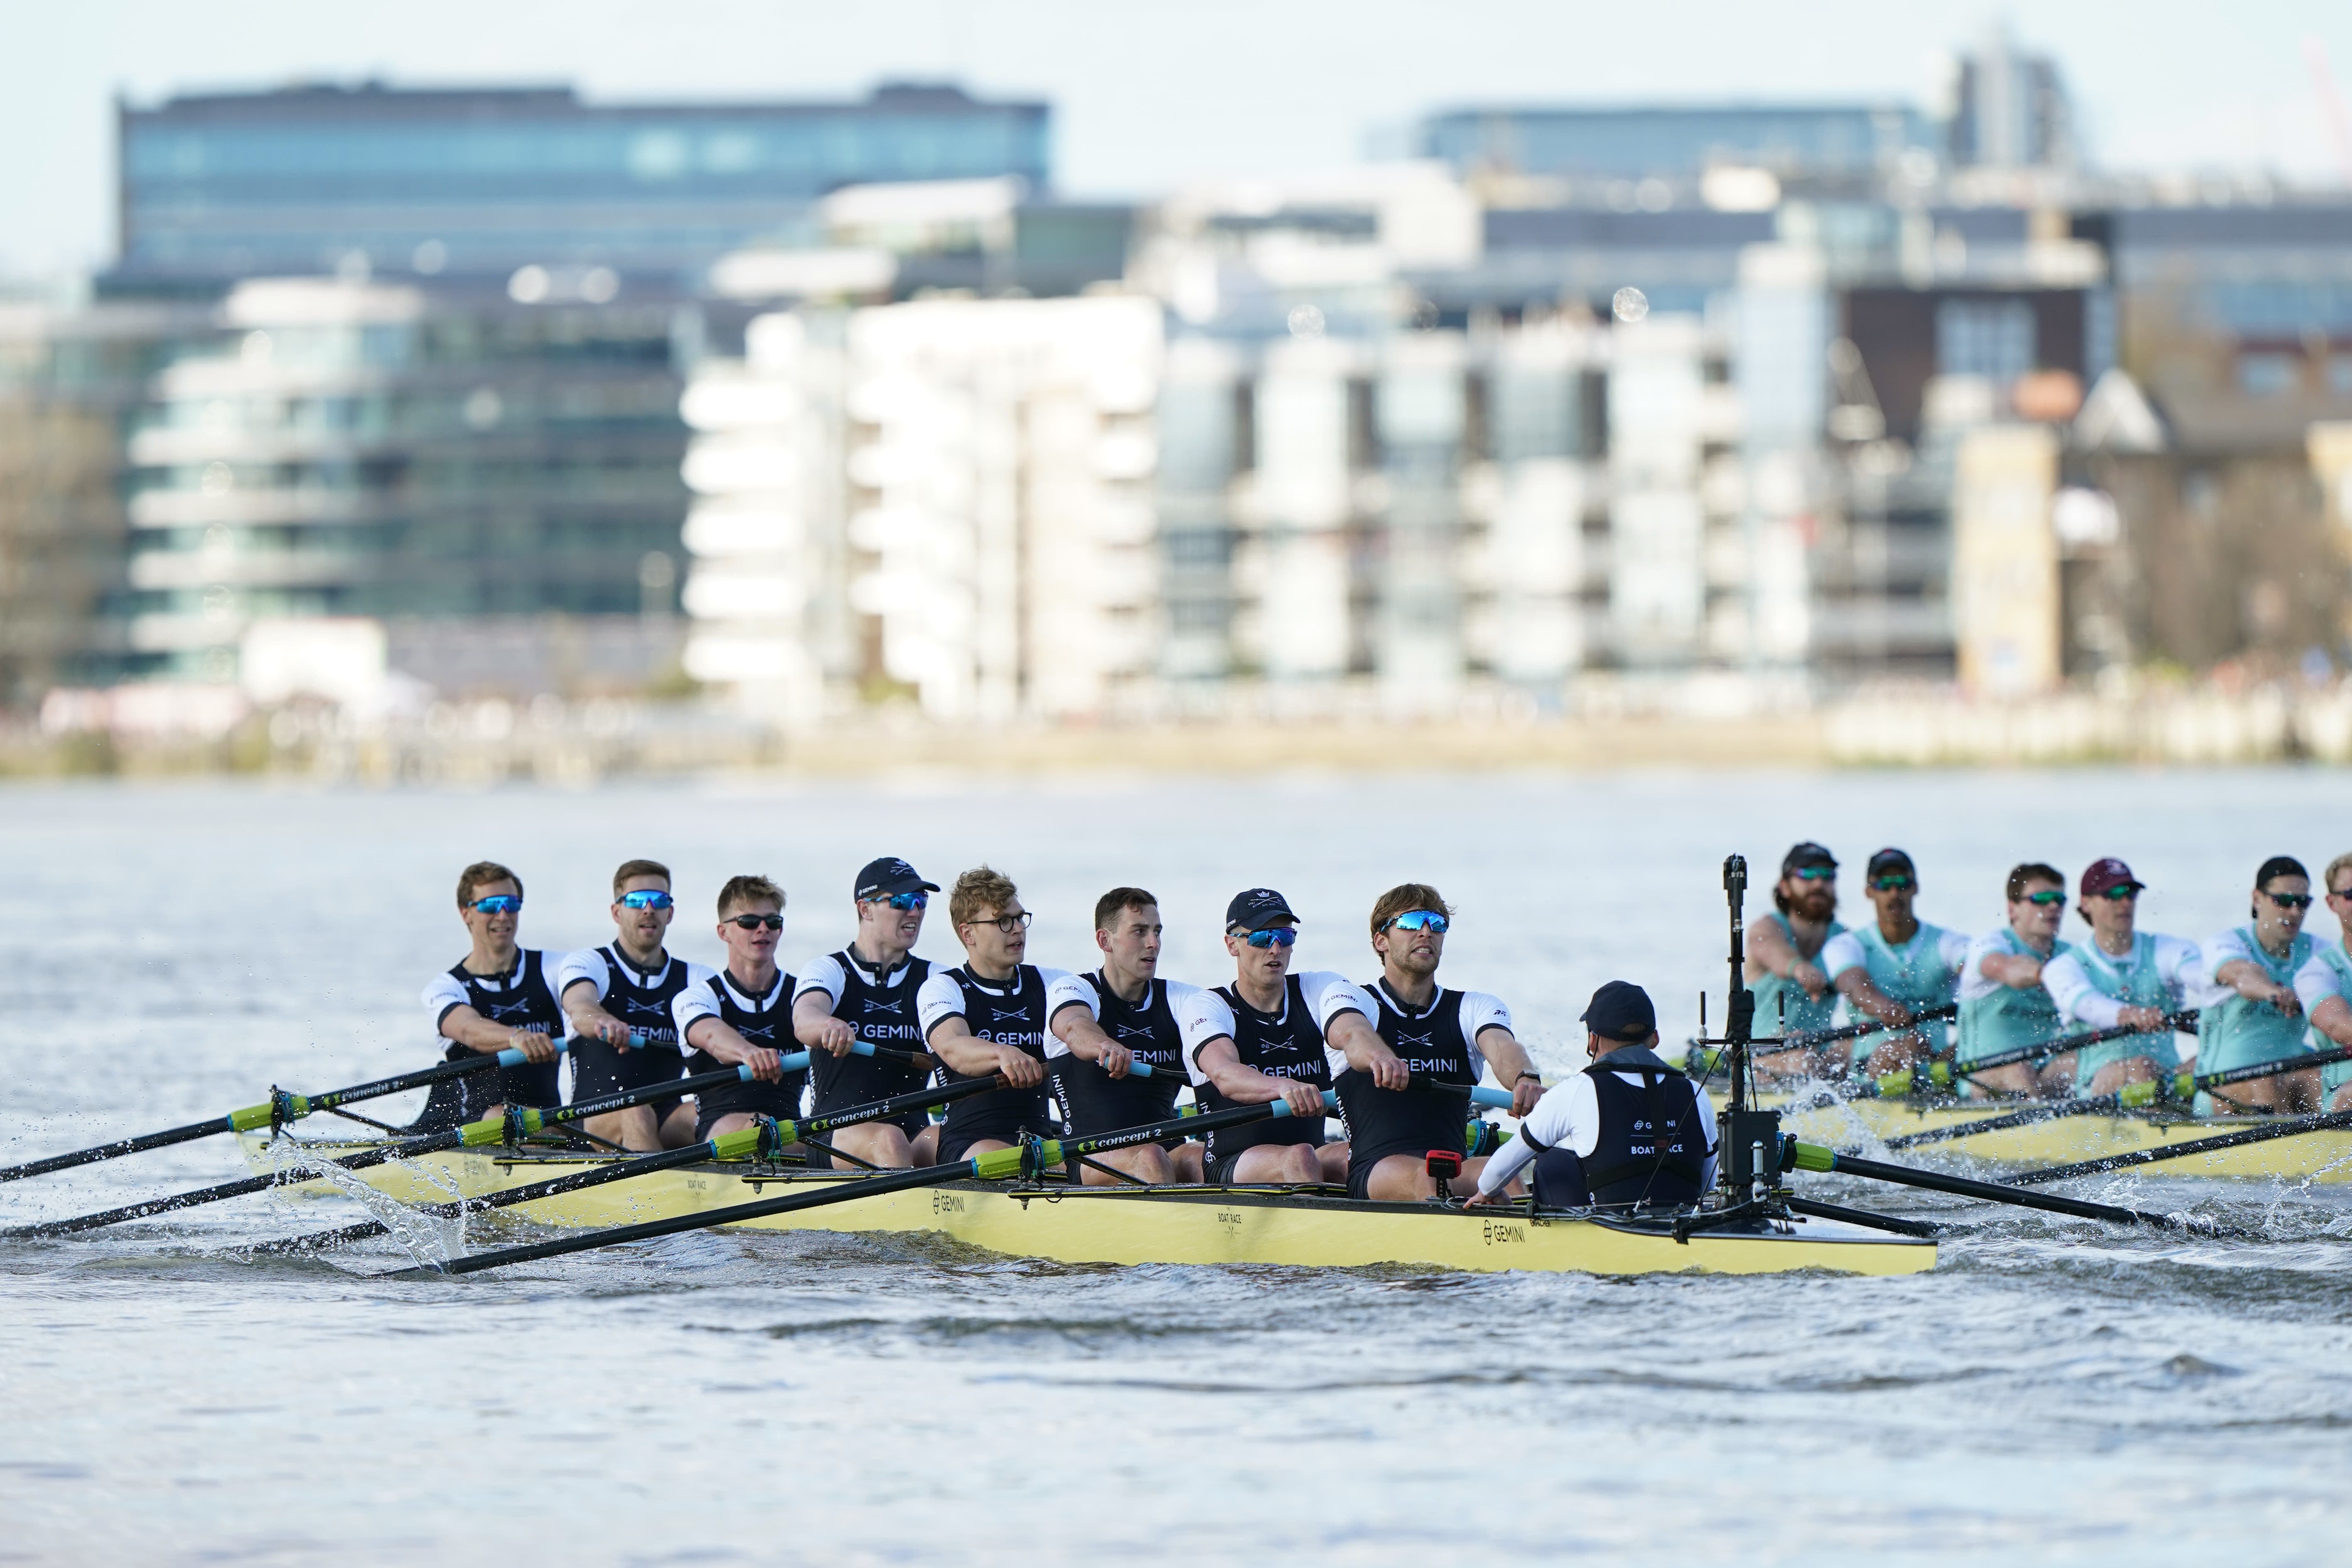 Oxford rowing captain Leonard Jenkins said some of the team had been struggling with illness during Saturday’s Boat Race